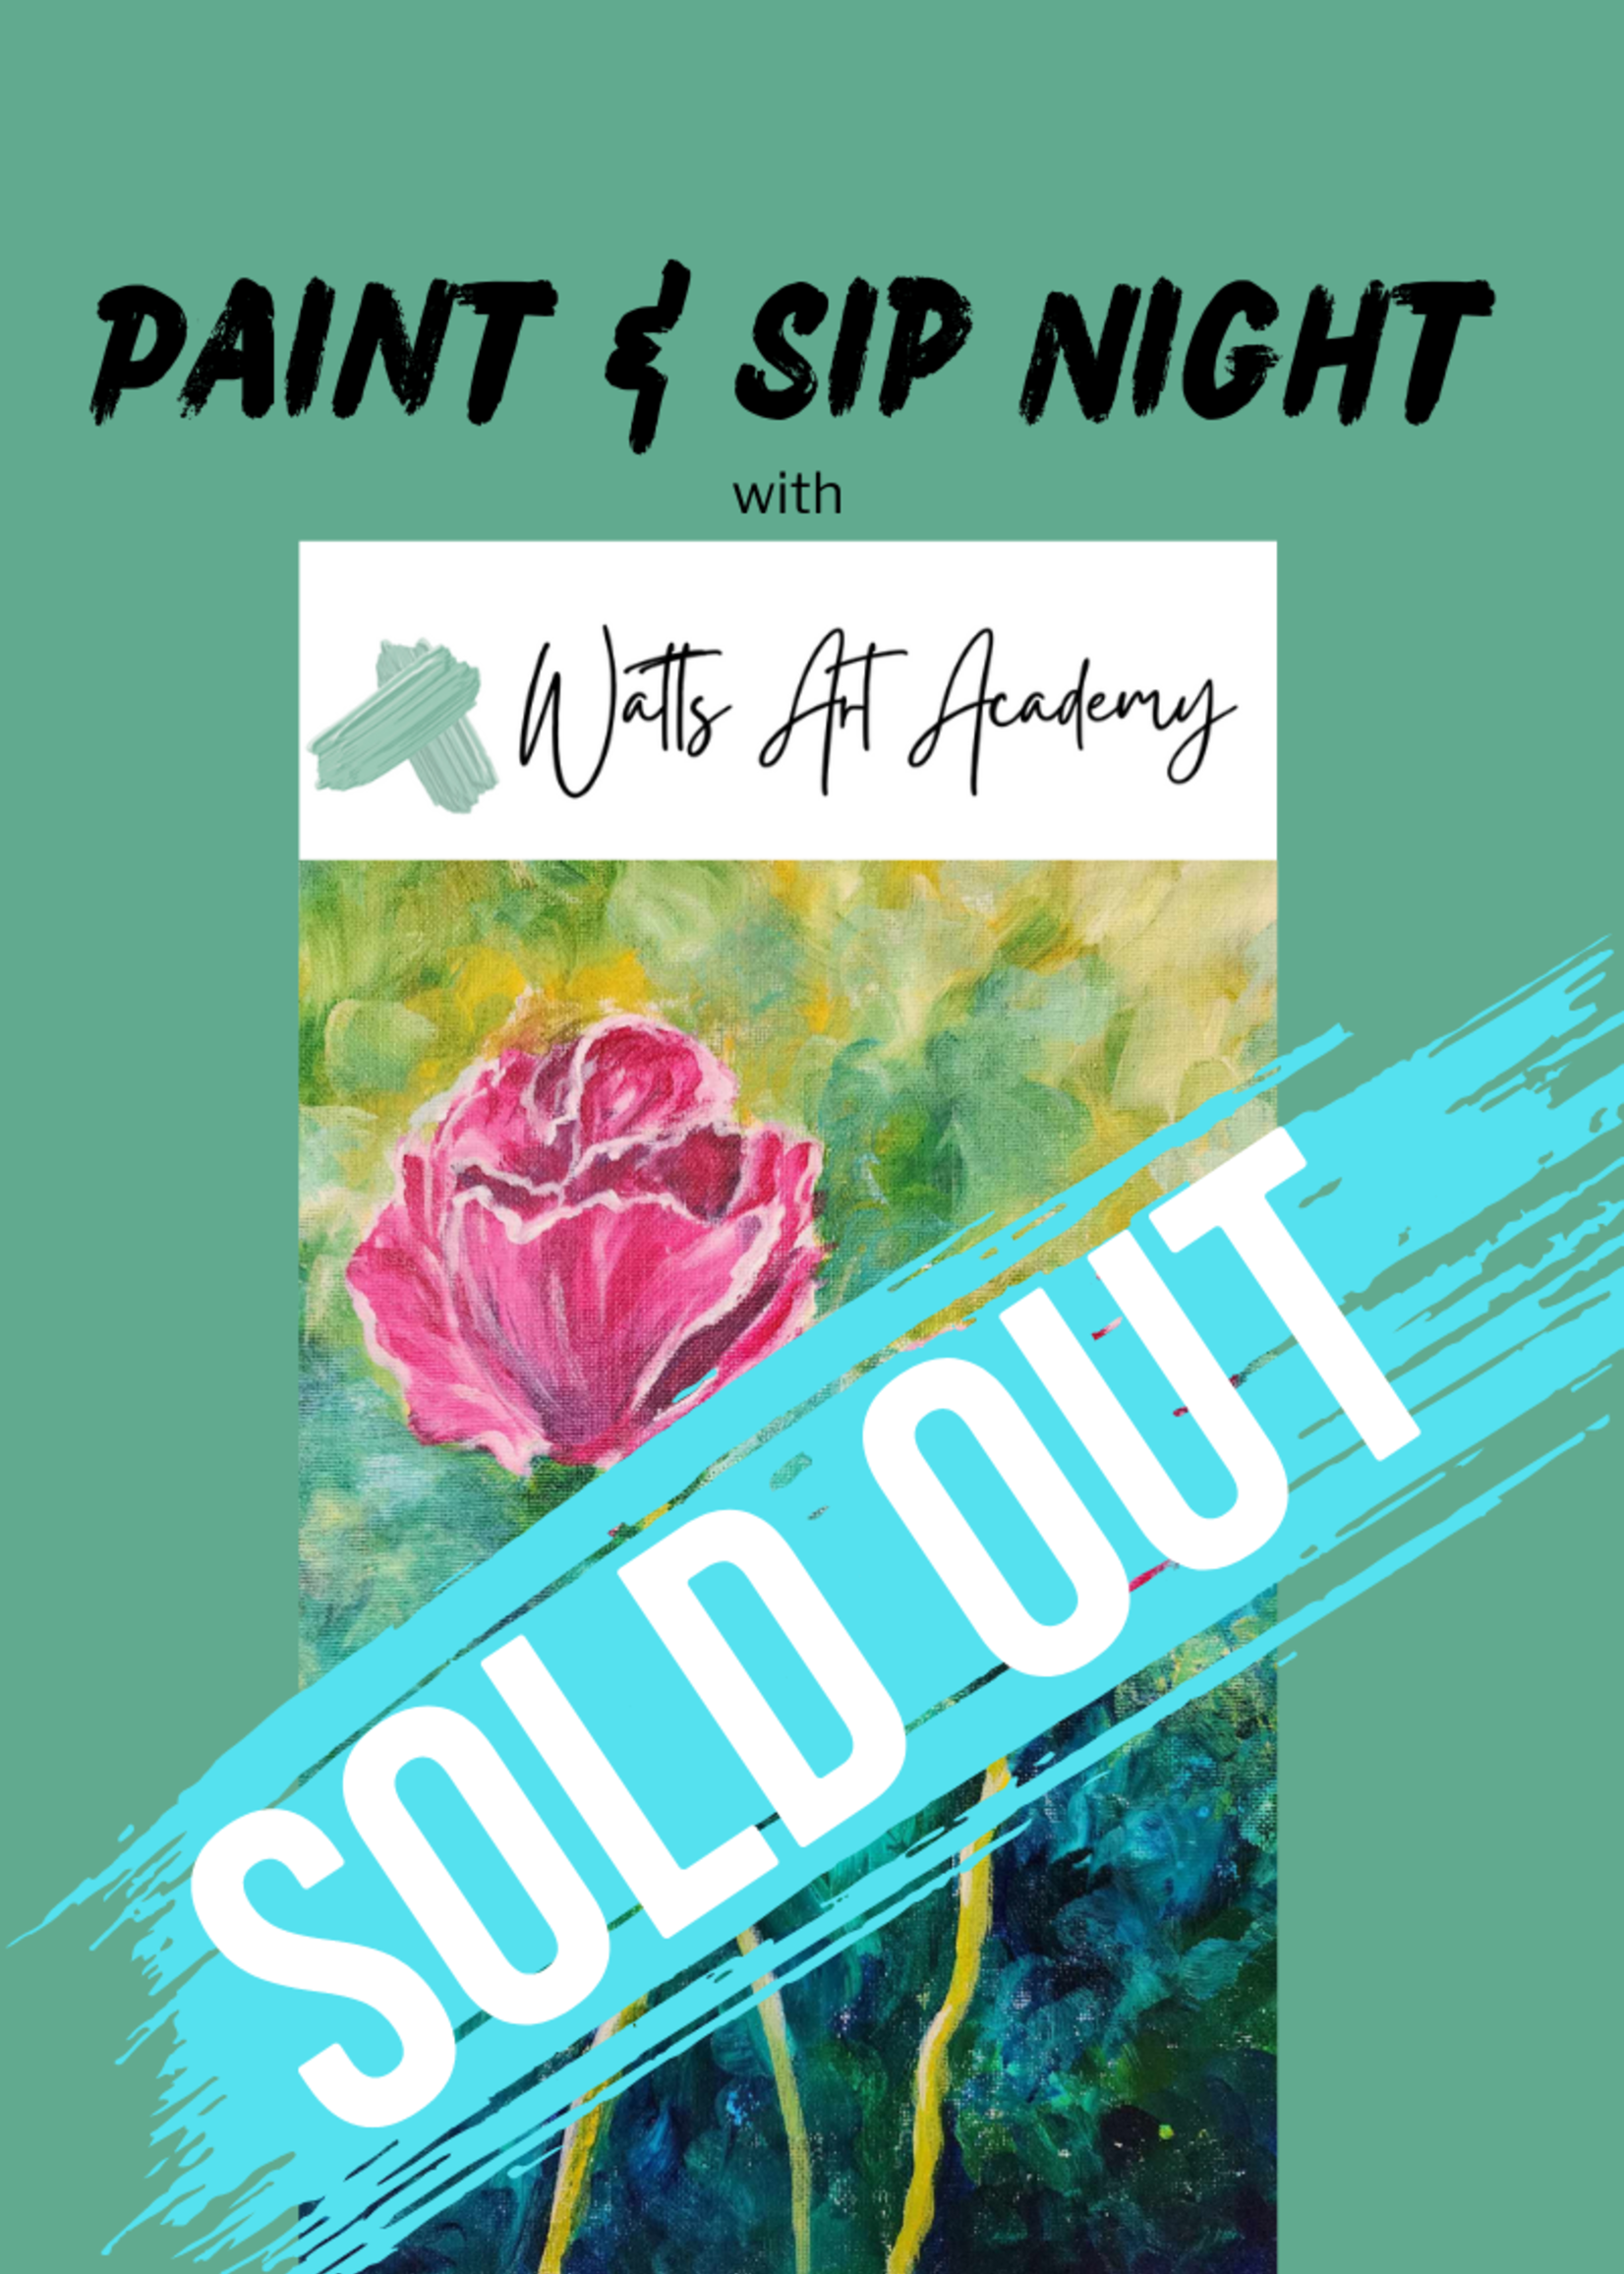 Paint & Sip Night - Thursday, May 2 @ 6:00-8:00 pm